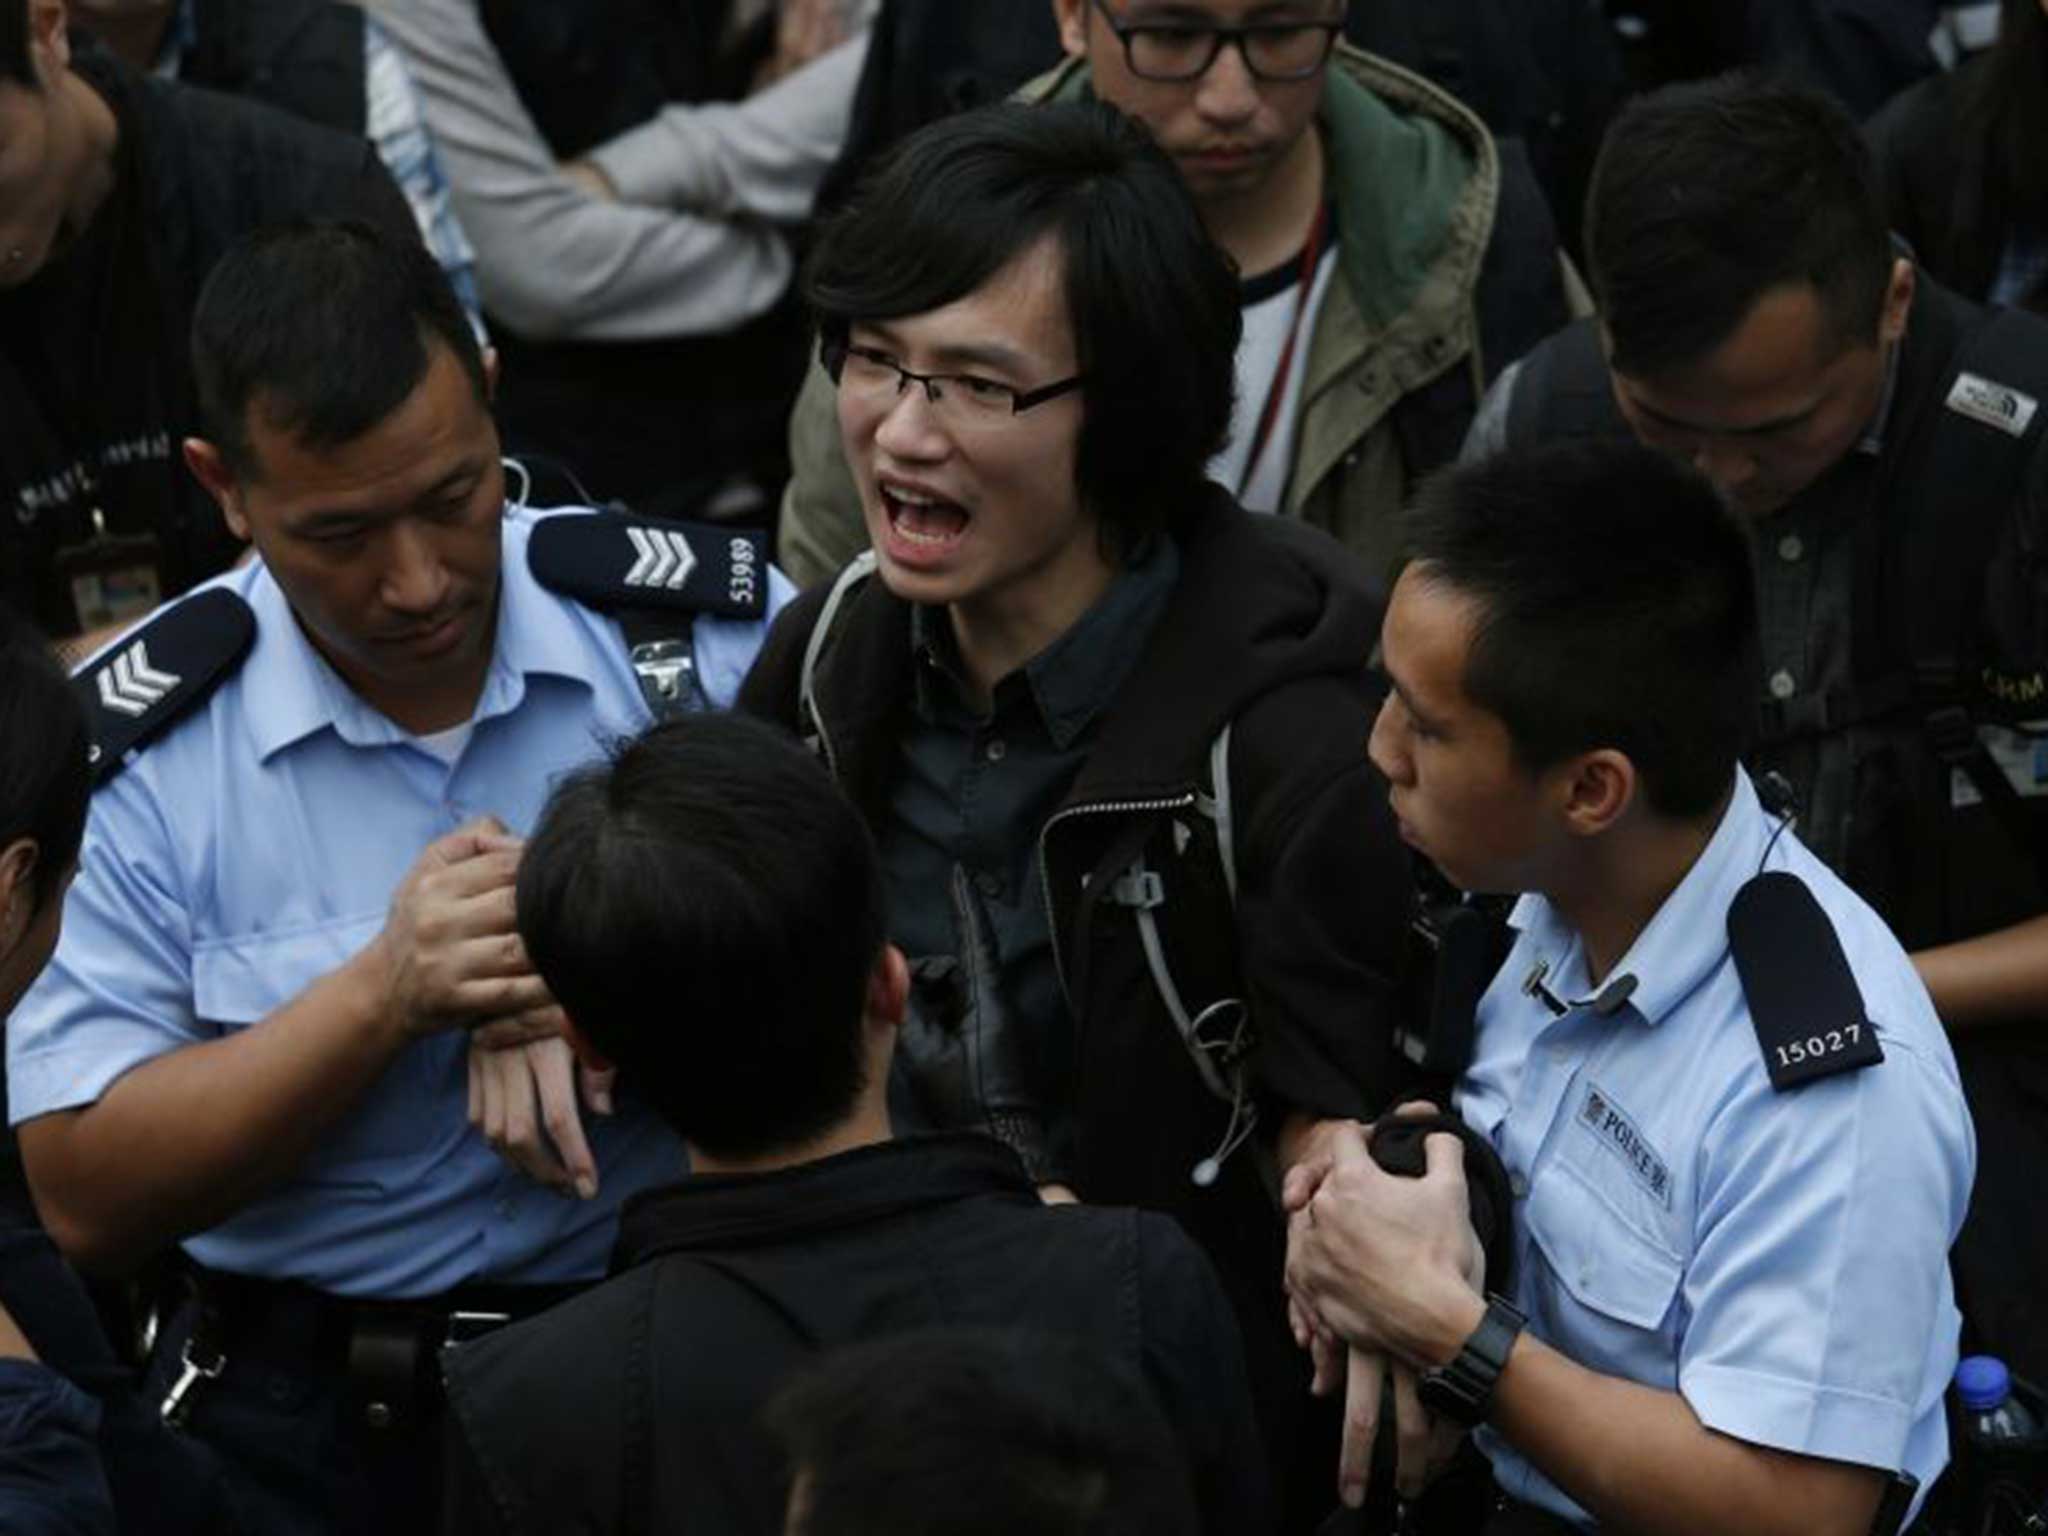 Police remove one of Hong Kong's 'Umbrella' protesters